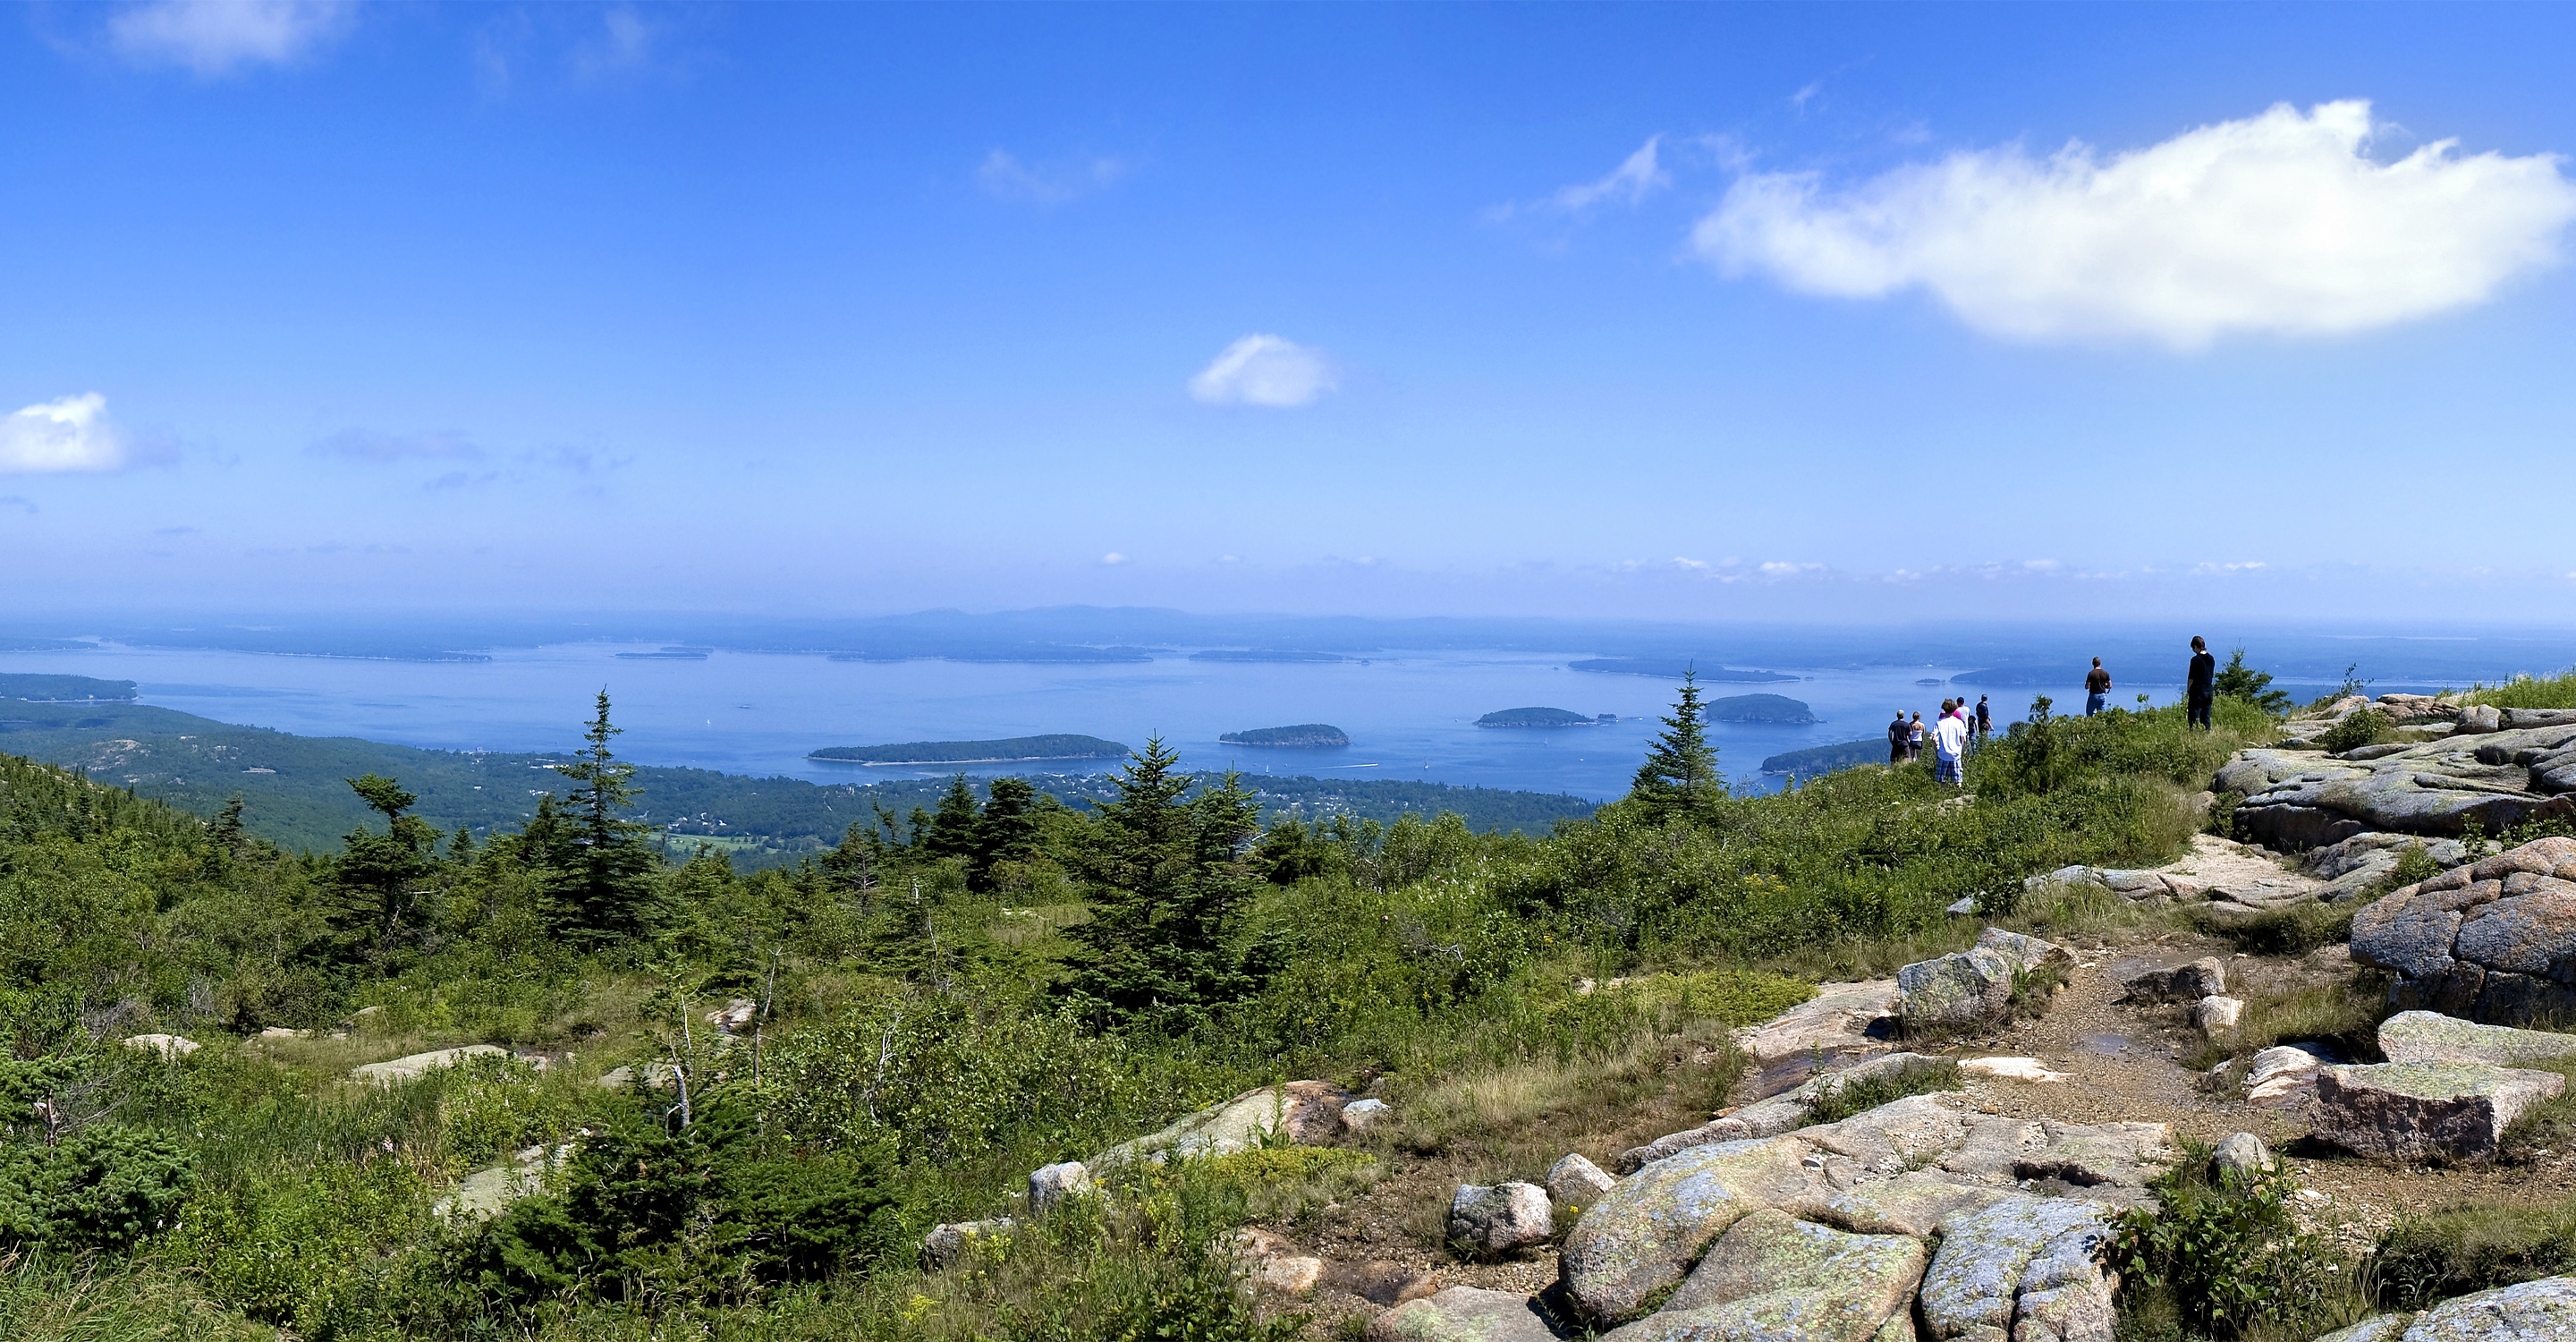 A view of Harbor Bay from Cadillac Mountain in Acadia National Park, Maine, USA